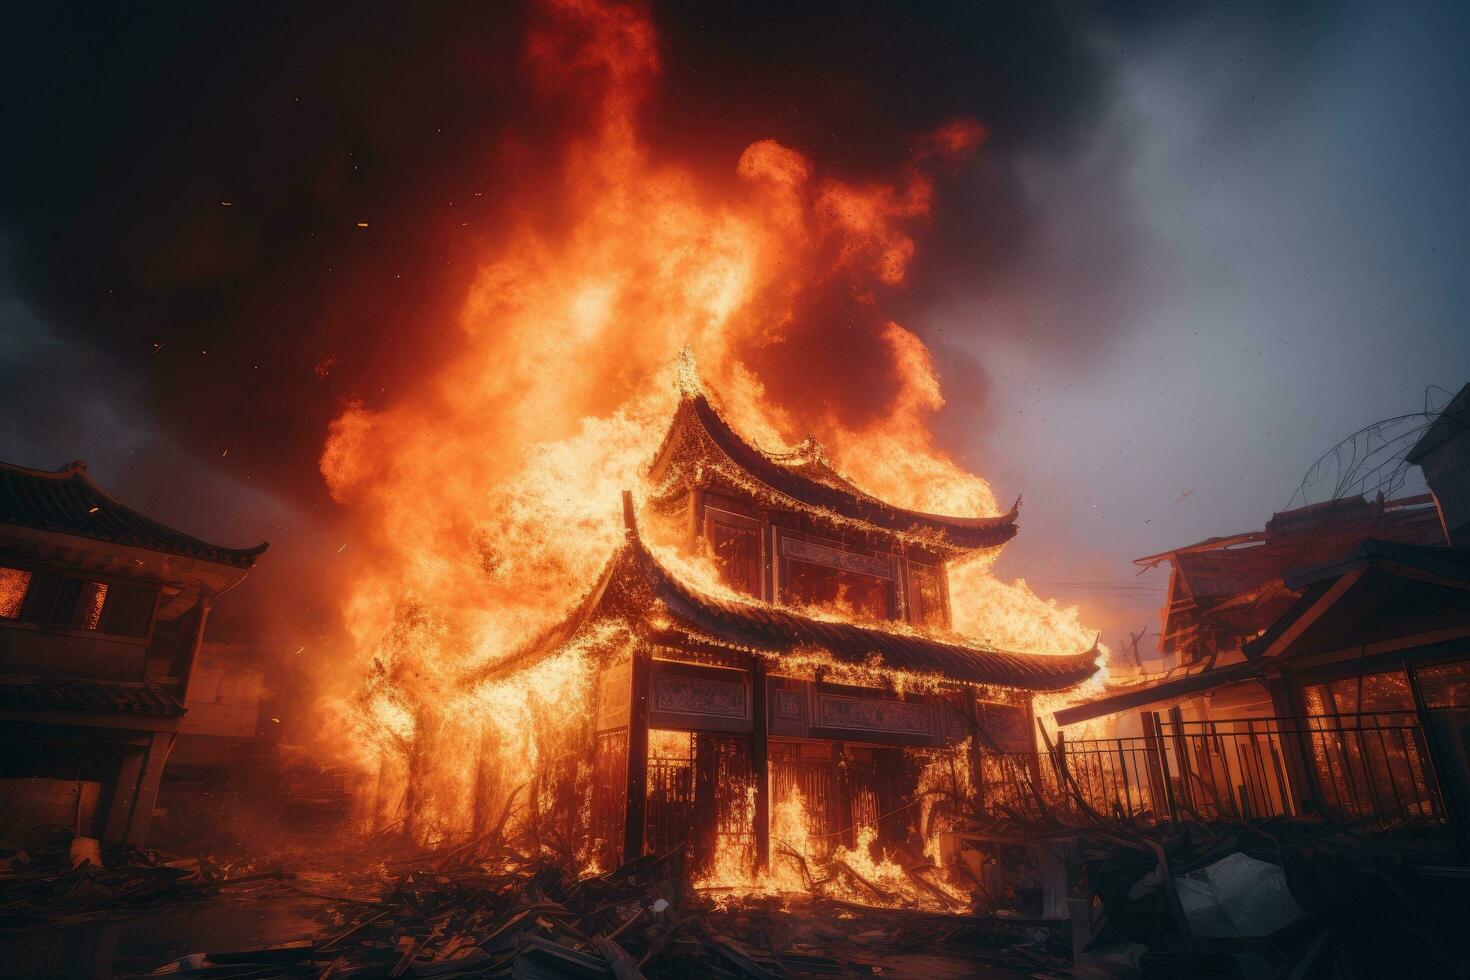 Burning house at night in Yunnan, China. Fire in the old house. Asian house on fire and firefighters are trying to stop the fire, AI Generated photo